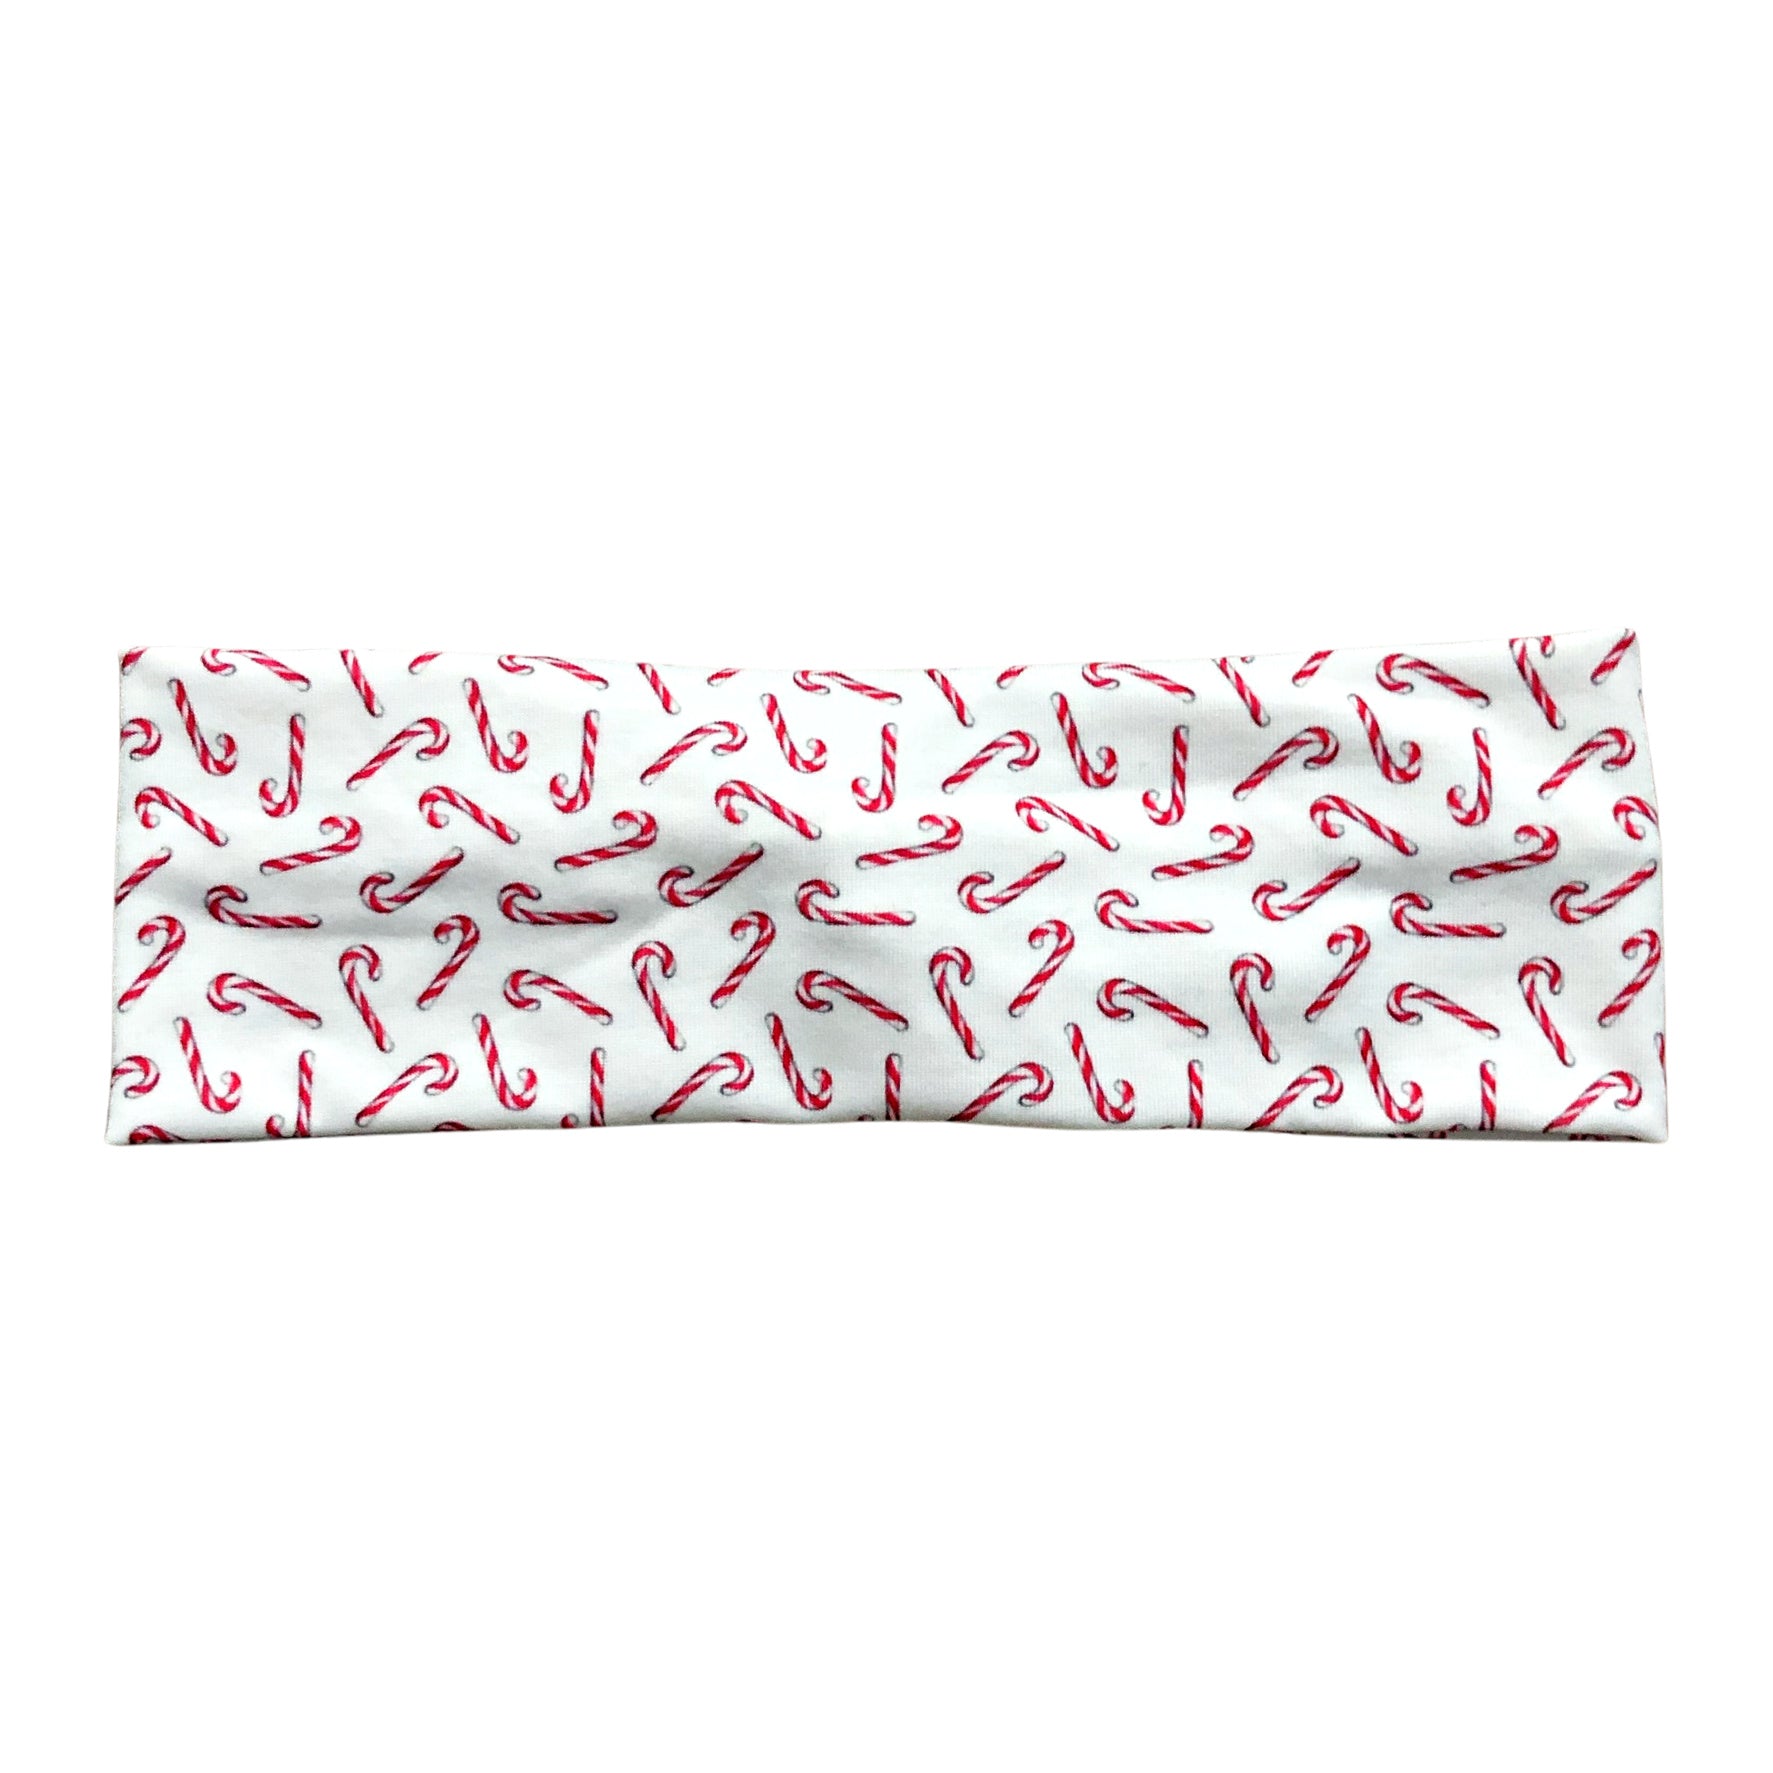 Candy Cane Headband for Women